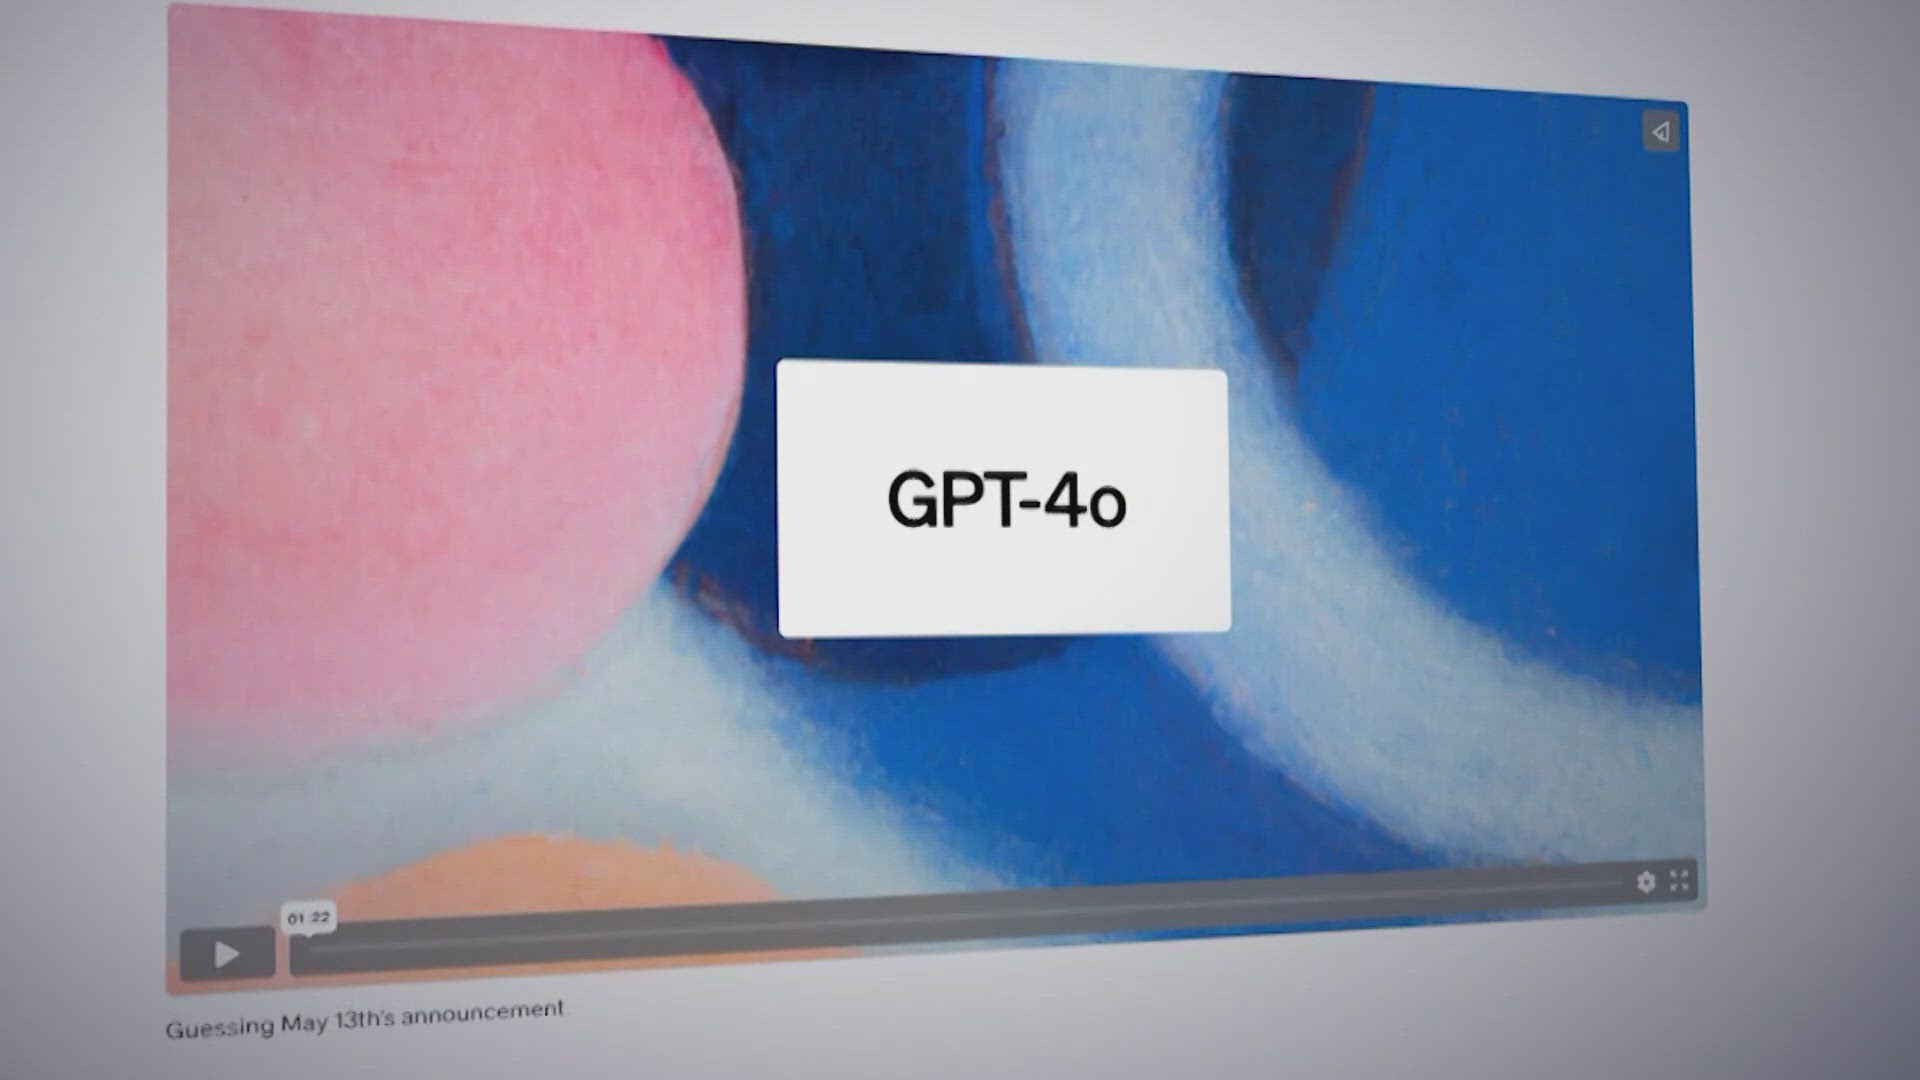 The new model, called GPT-4o, is an update from the company’s previous GPT-4 model, which launched just over a year ago.